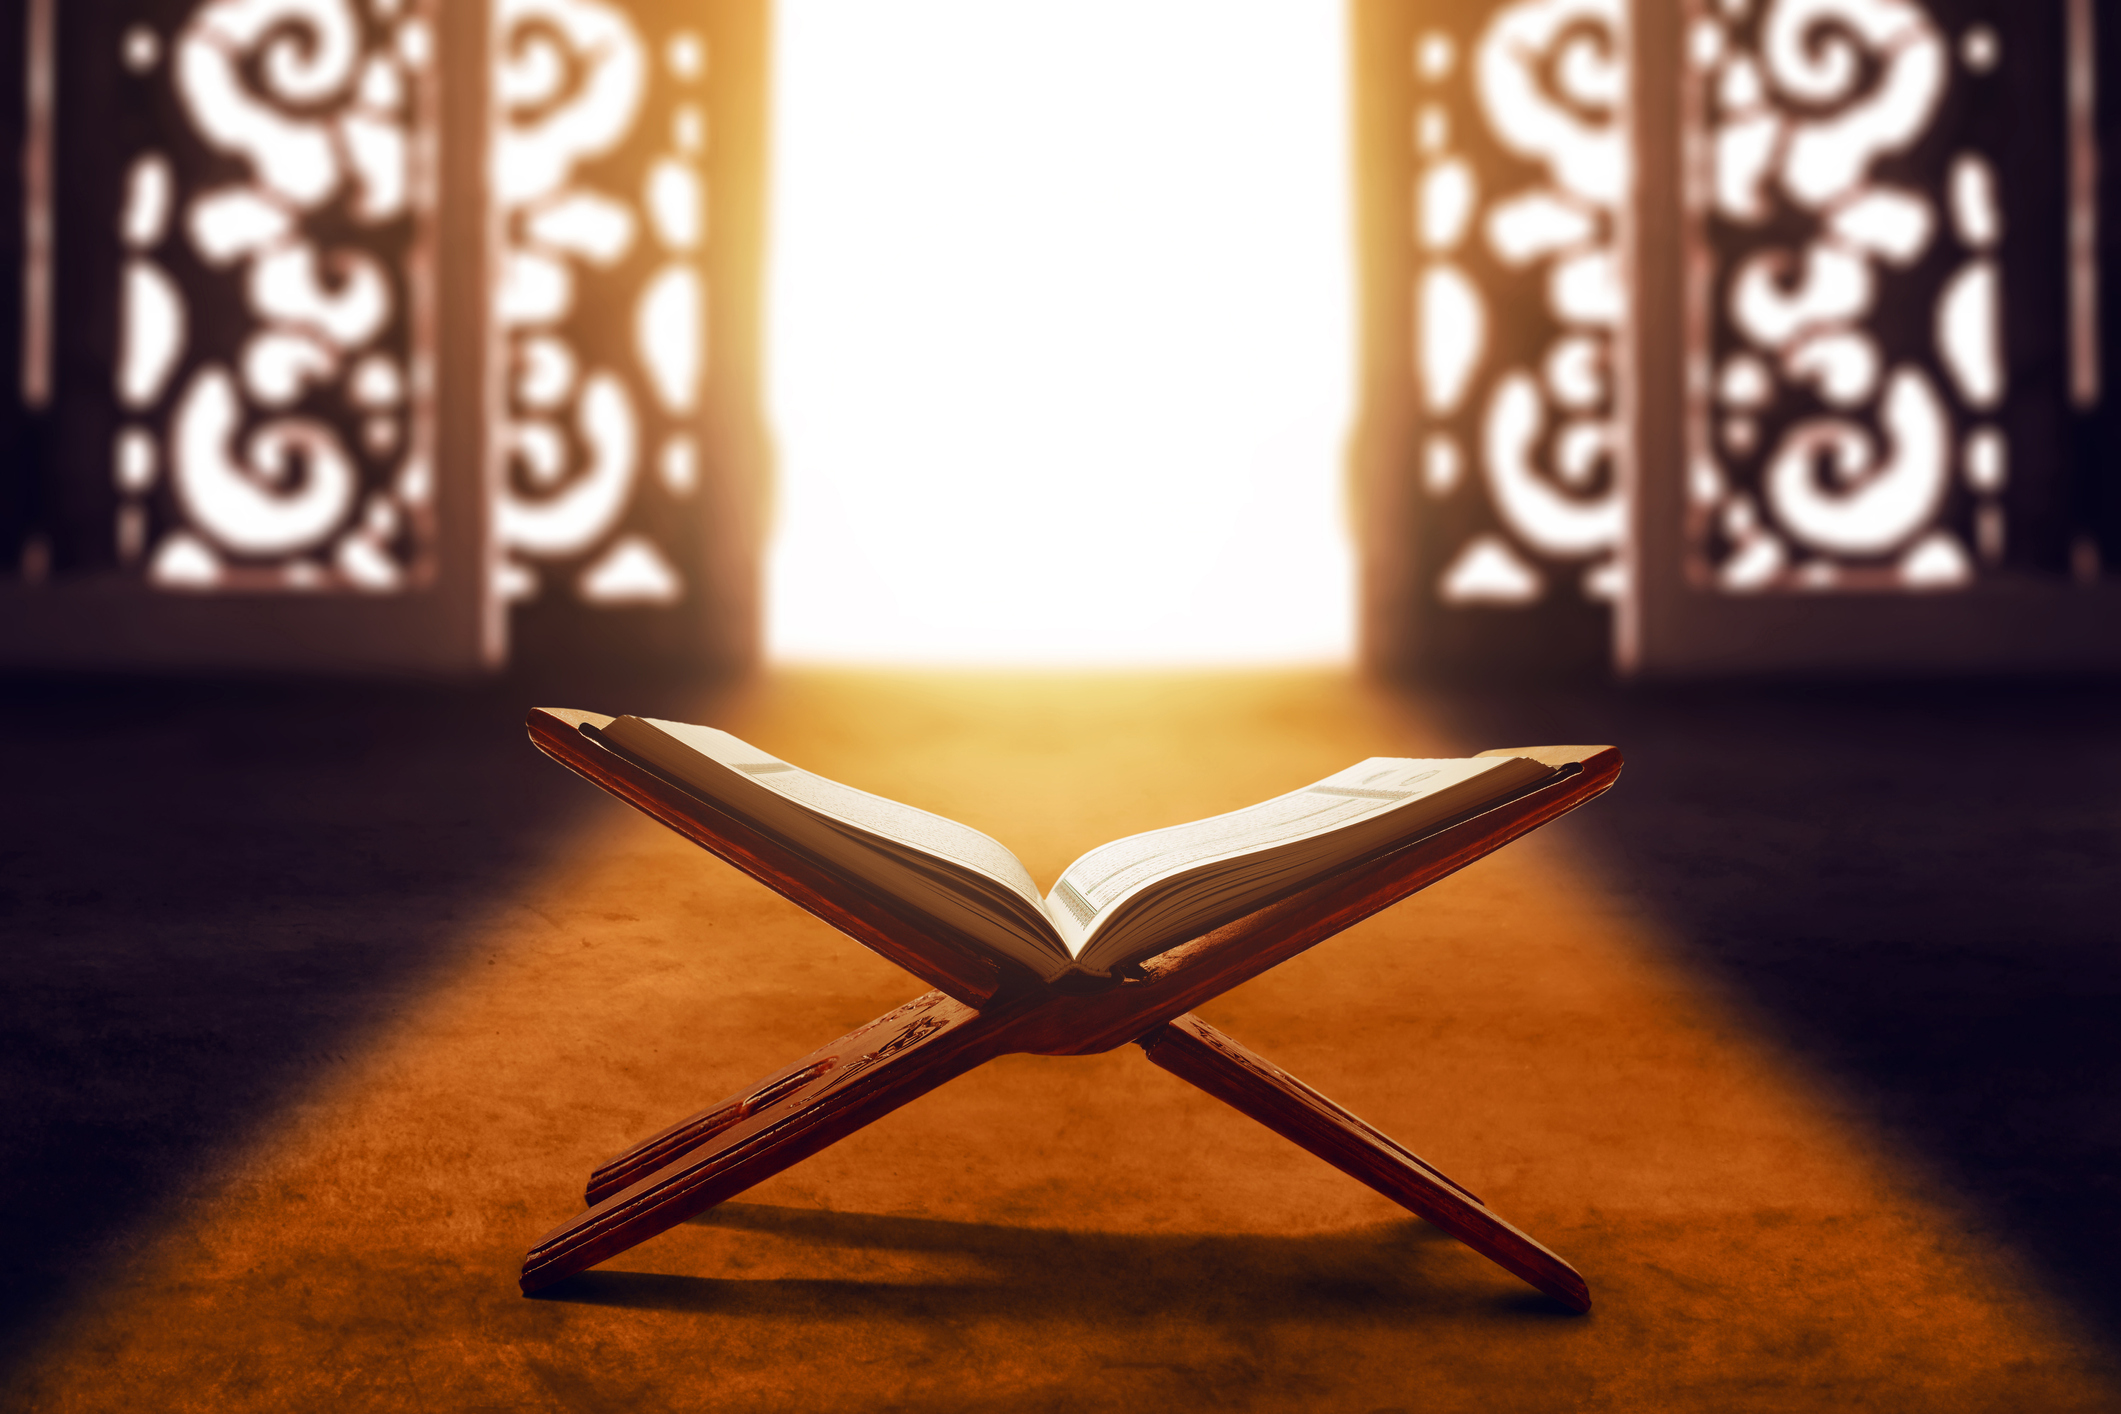 Testimony Tuesday: When a Muslim Knows the Bible More Than You